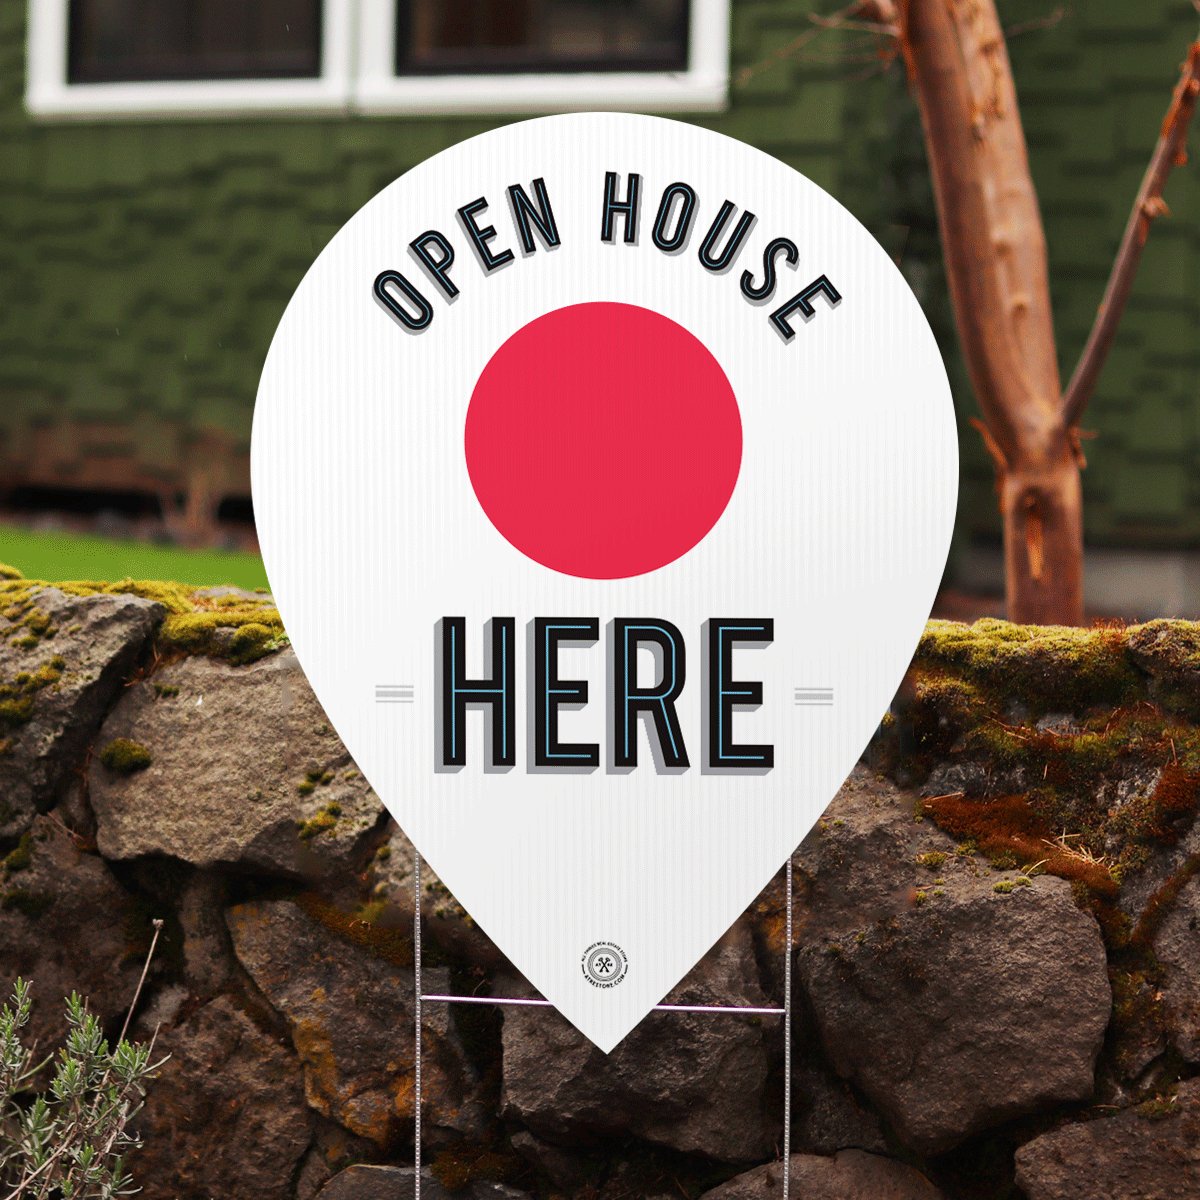 Open House Here - Map Pin - All Things Real Estate